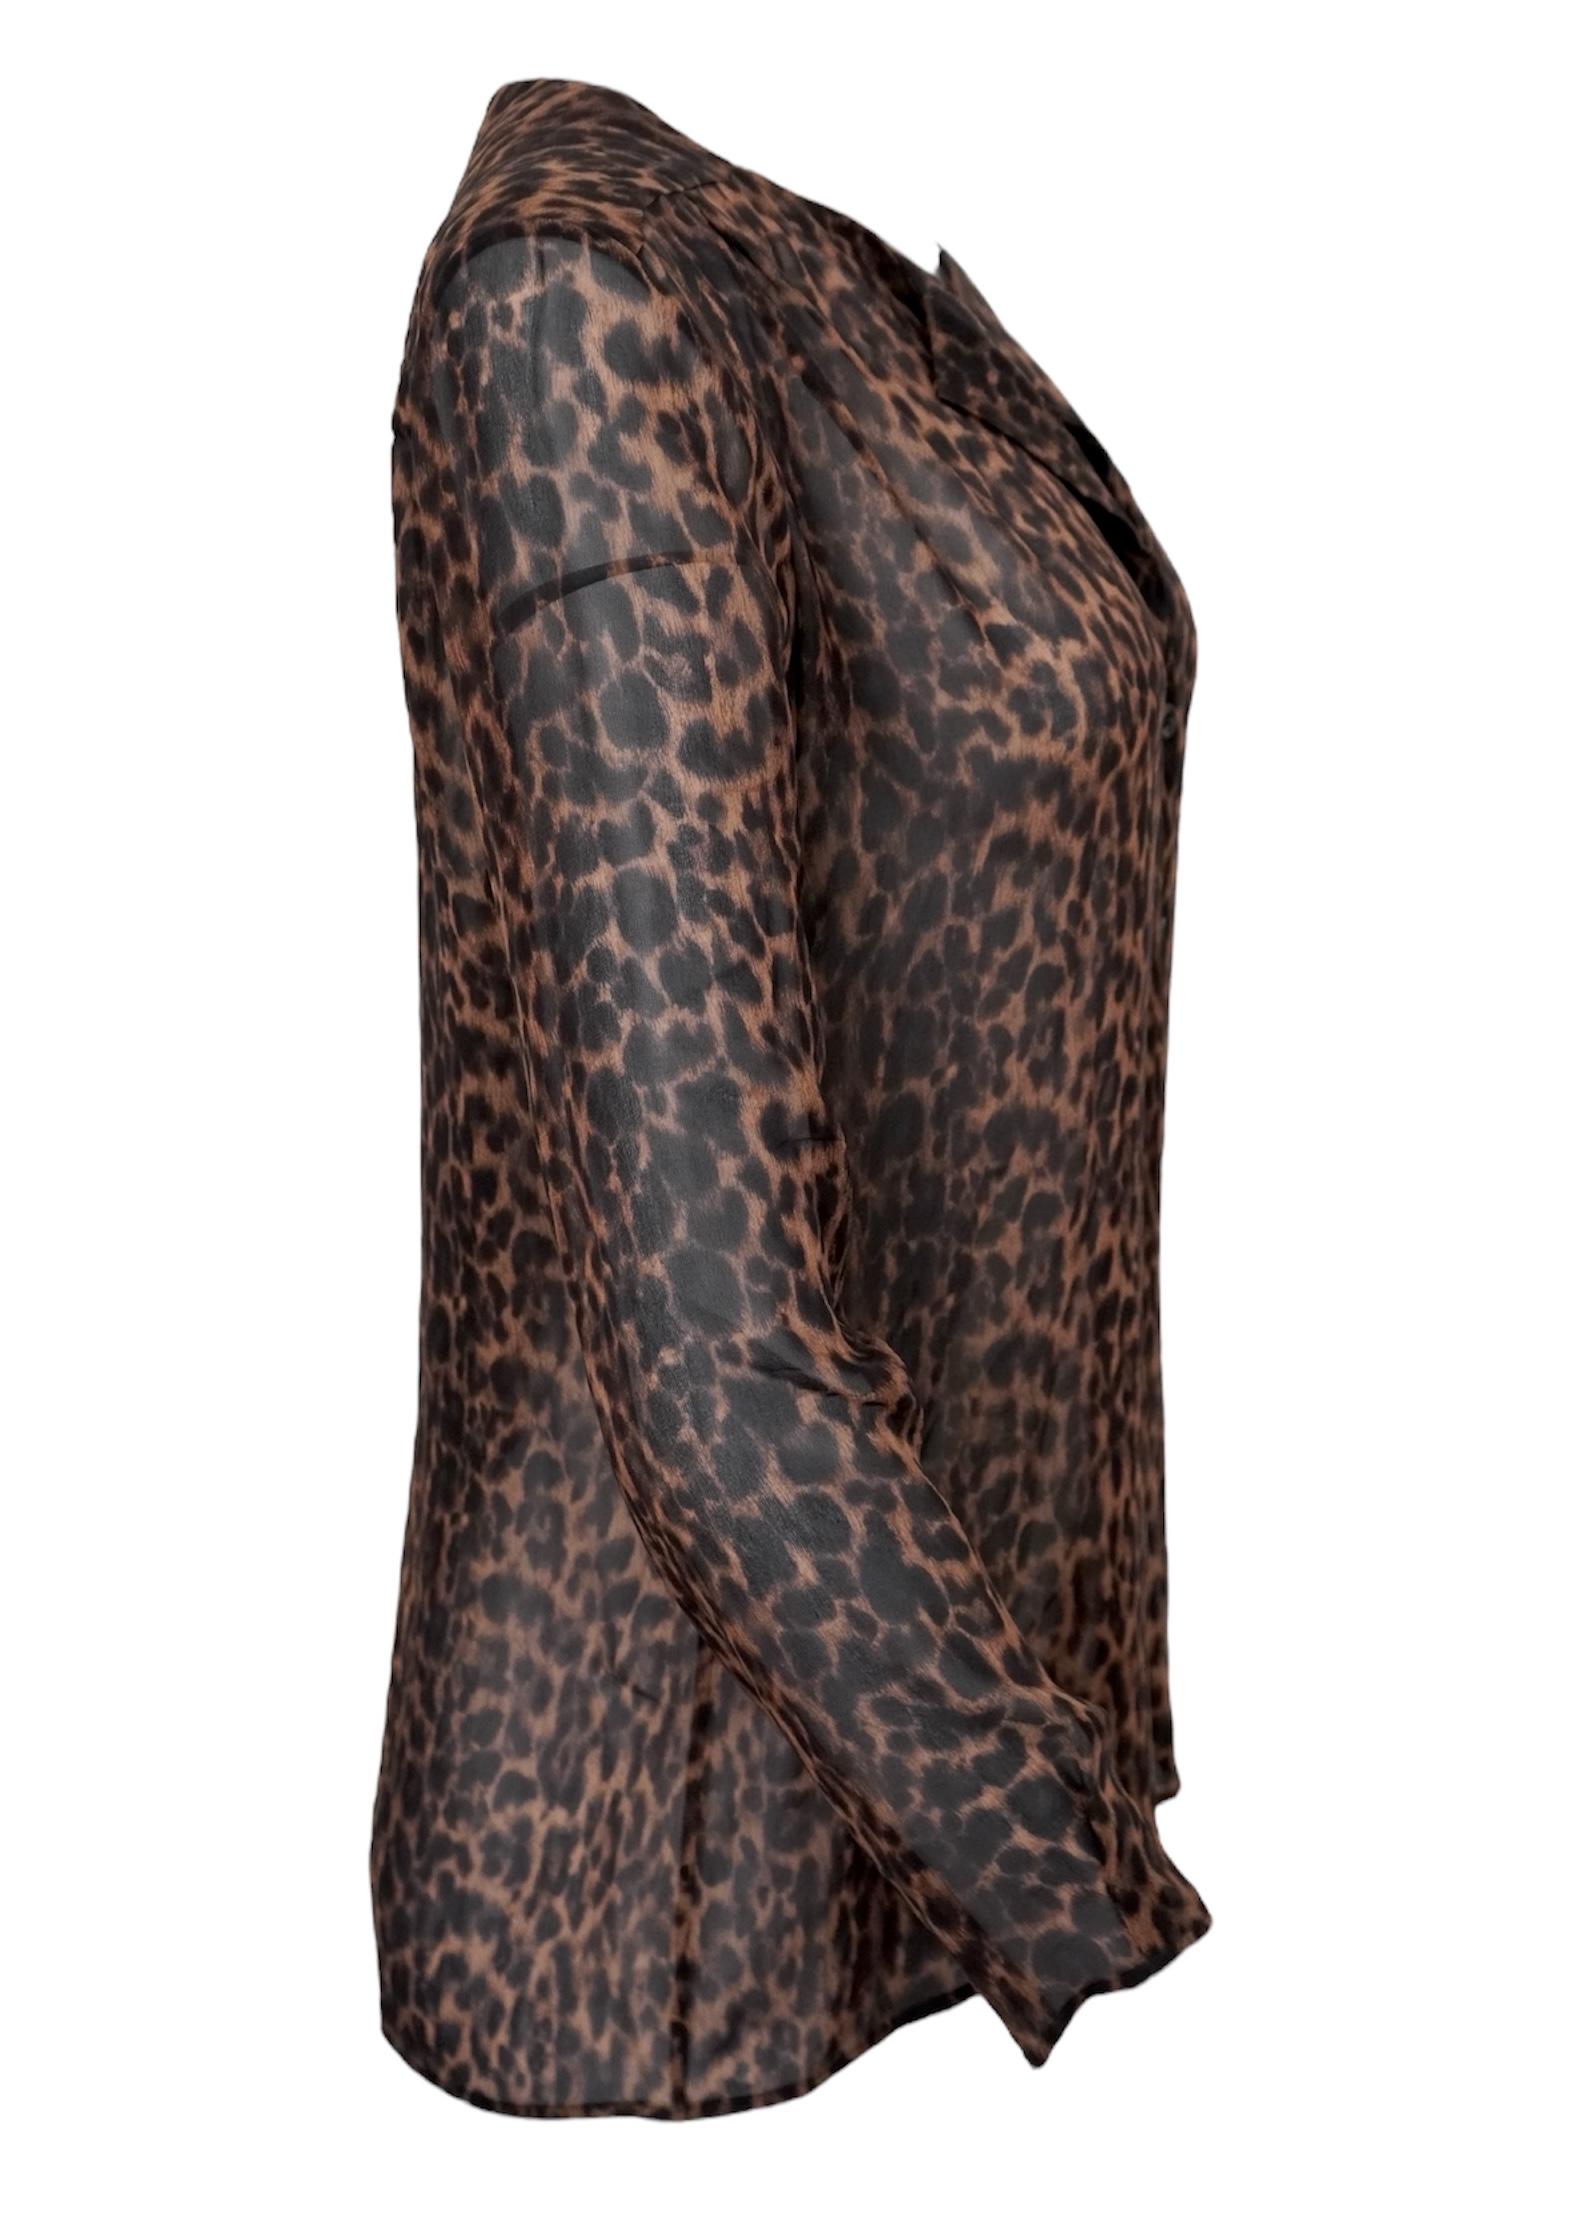 Yves Saint Laurent Silk Sheer Leopard Buttoned Top. Made in Italy. Sheer silk, long sleeve, 6 button closure. Size not marked. Length 27 inches, Bust 41 inches, Waist 39 inches. 

Yves Saint Laurent SAS, also known as Saint Laurent and YSL, is a